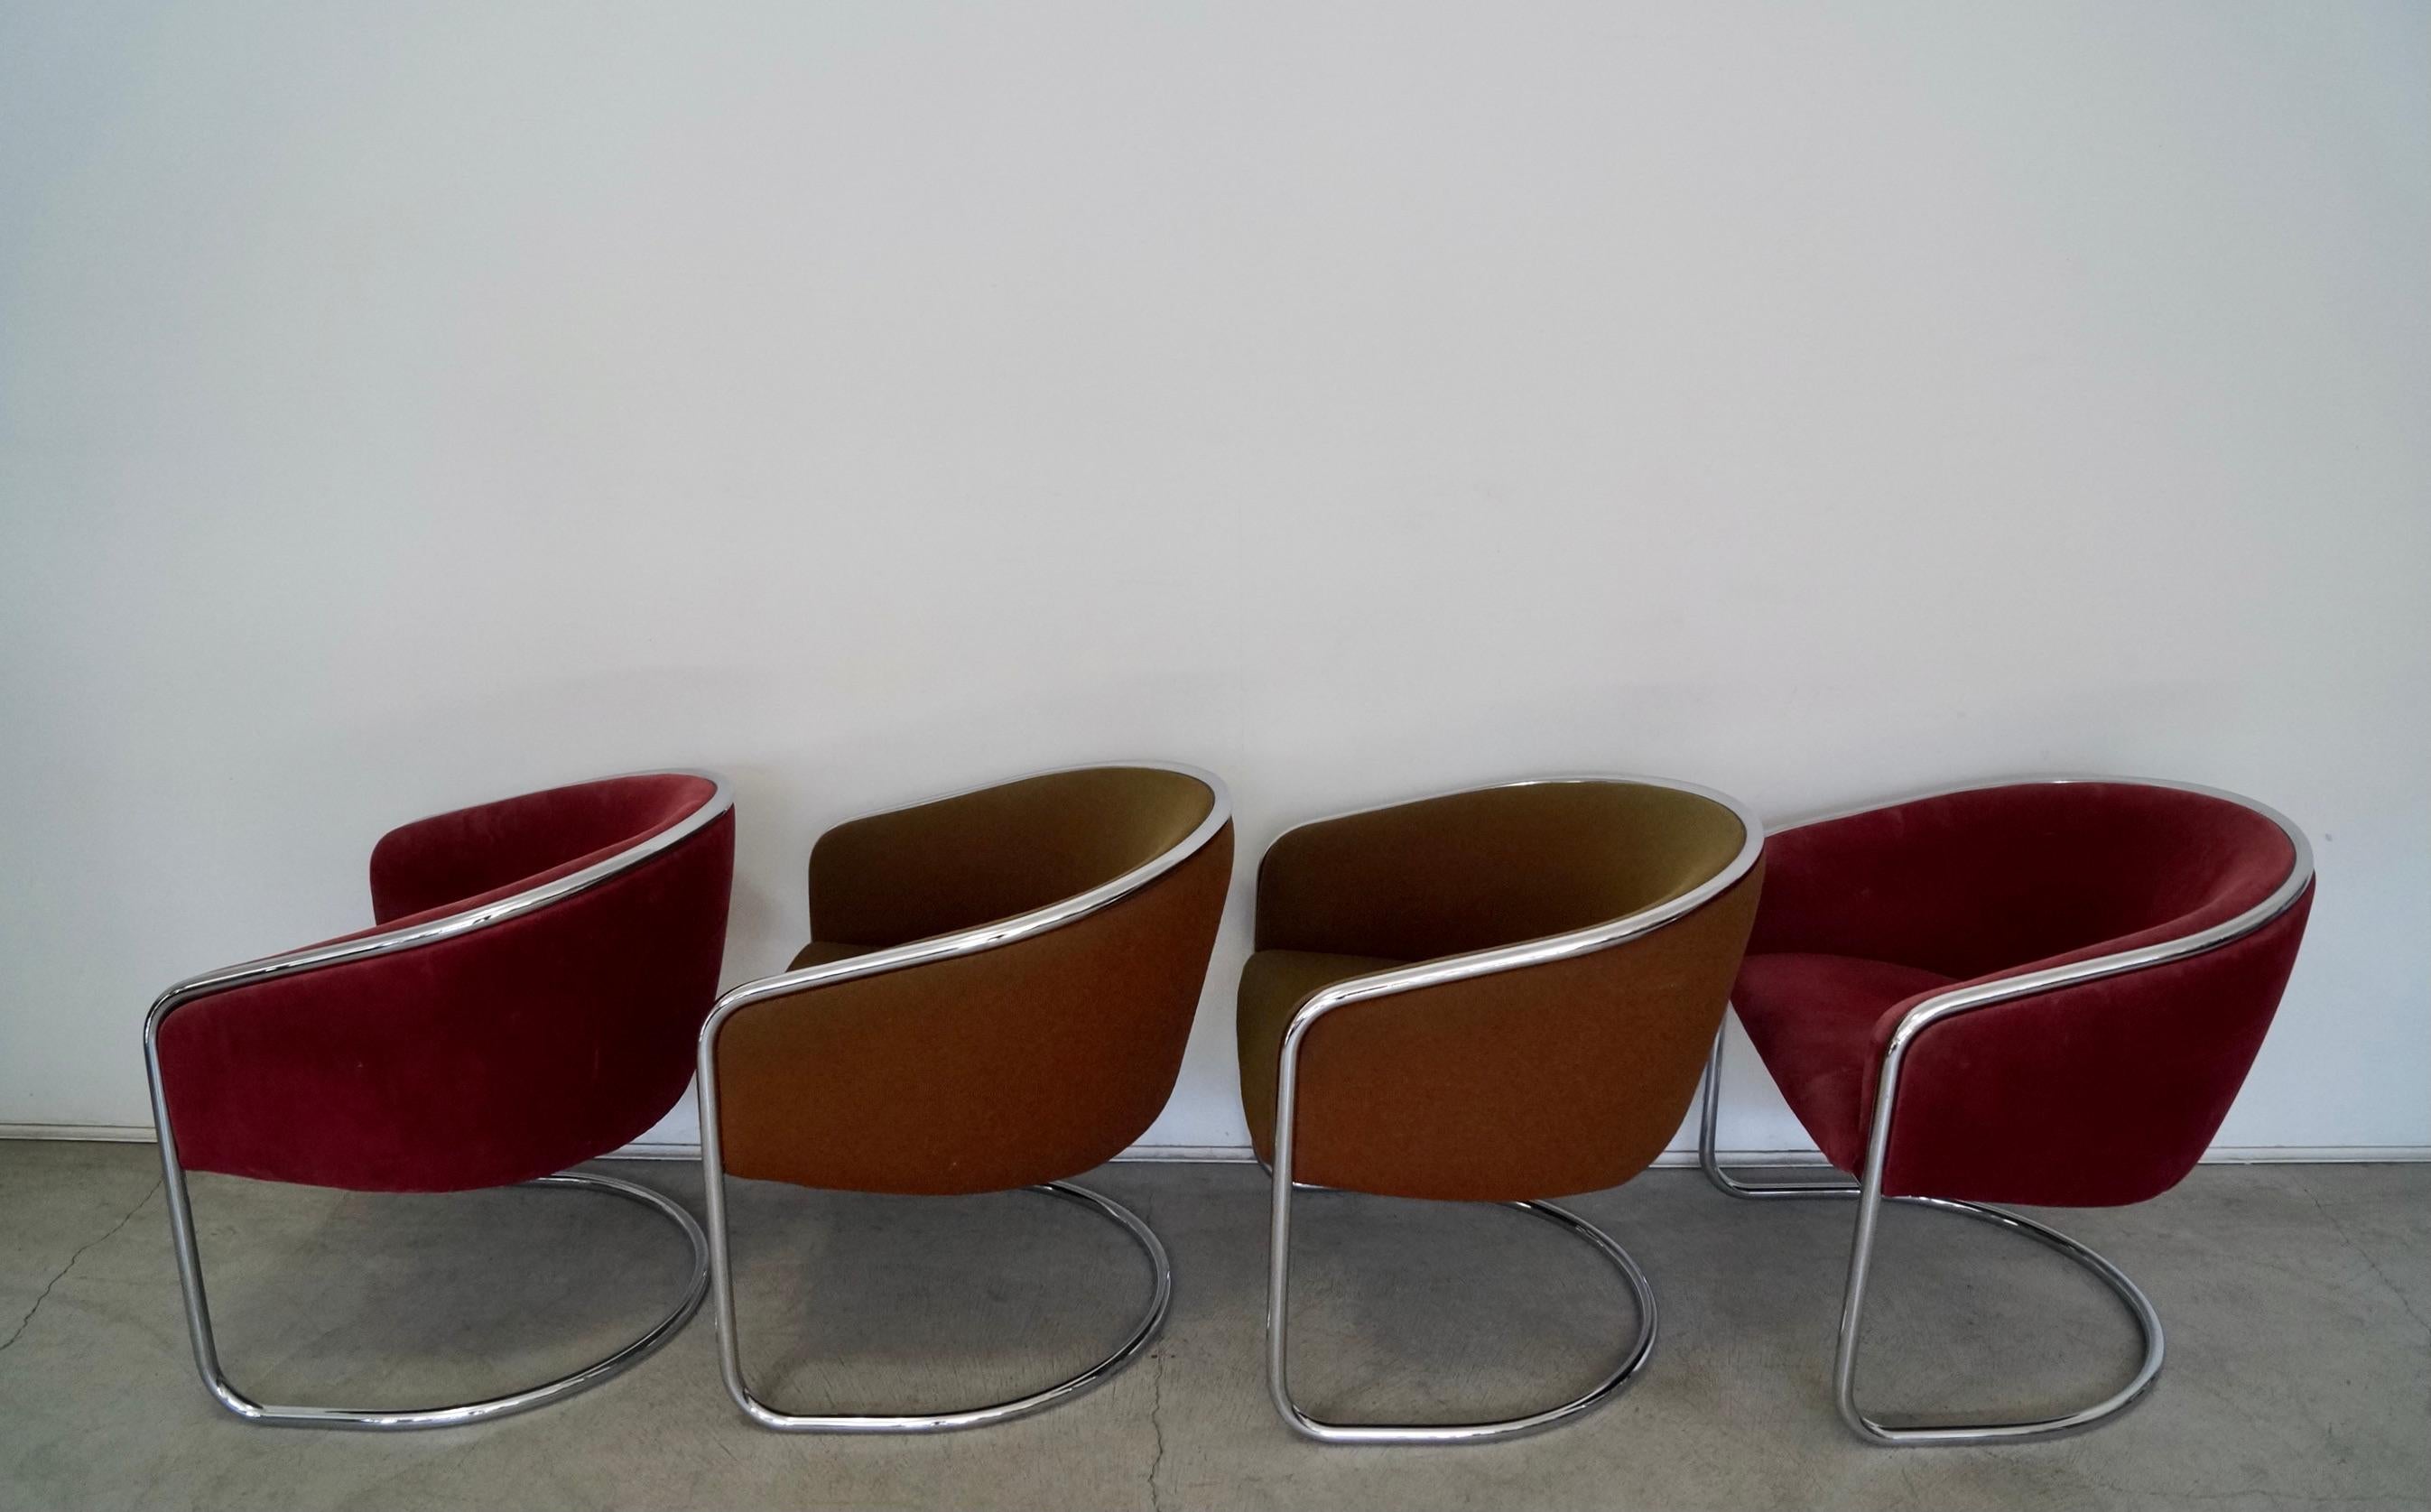 Late 20th Century 1970's Mid-Century Modern Thonet Chrome Armchairs - Set of Four For Sale